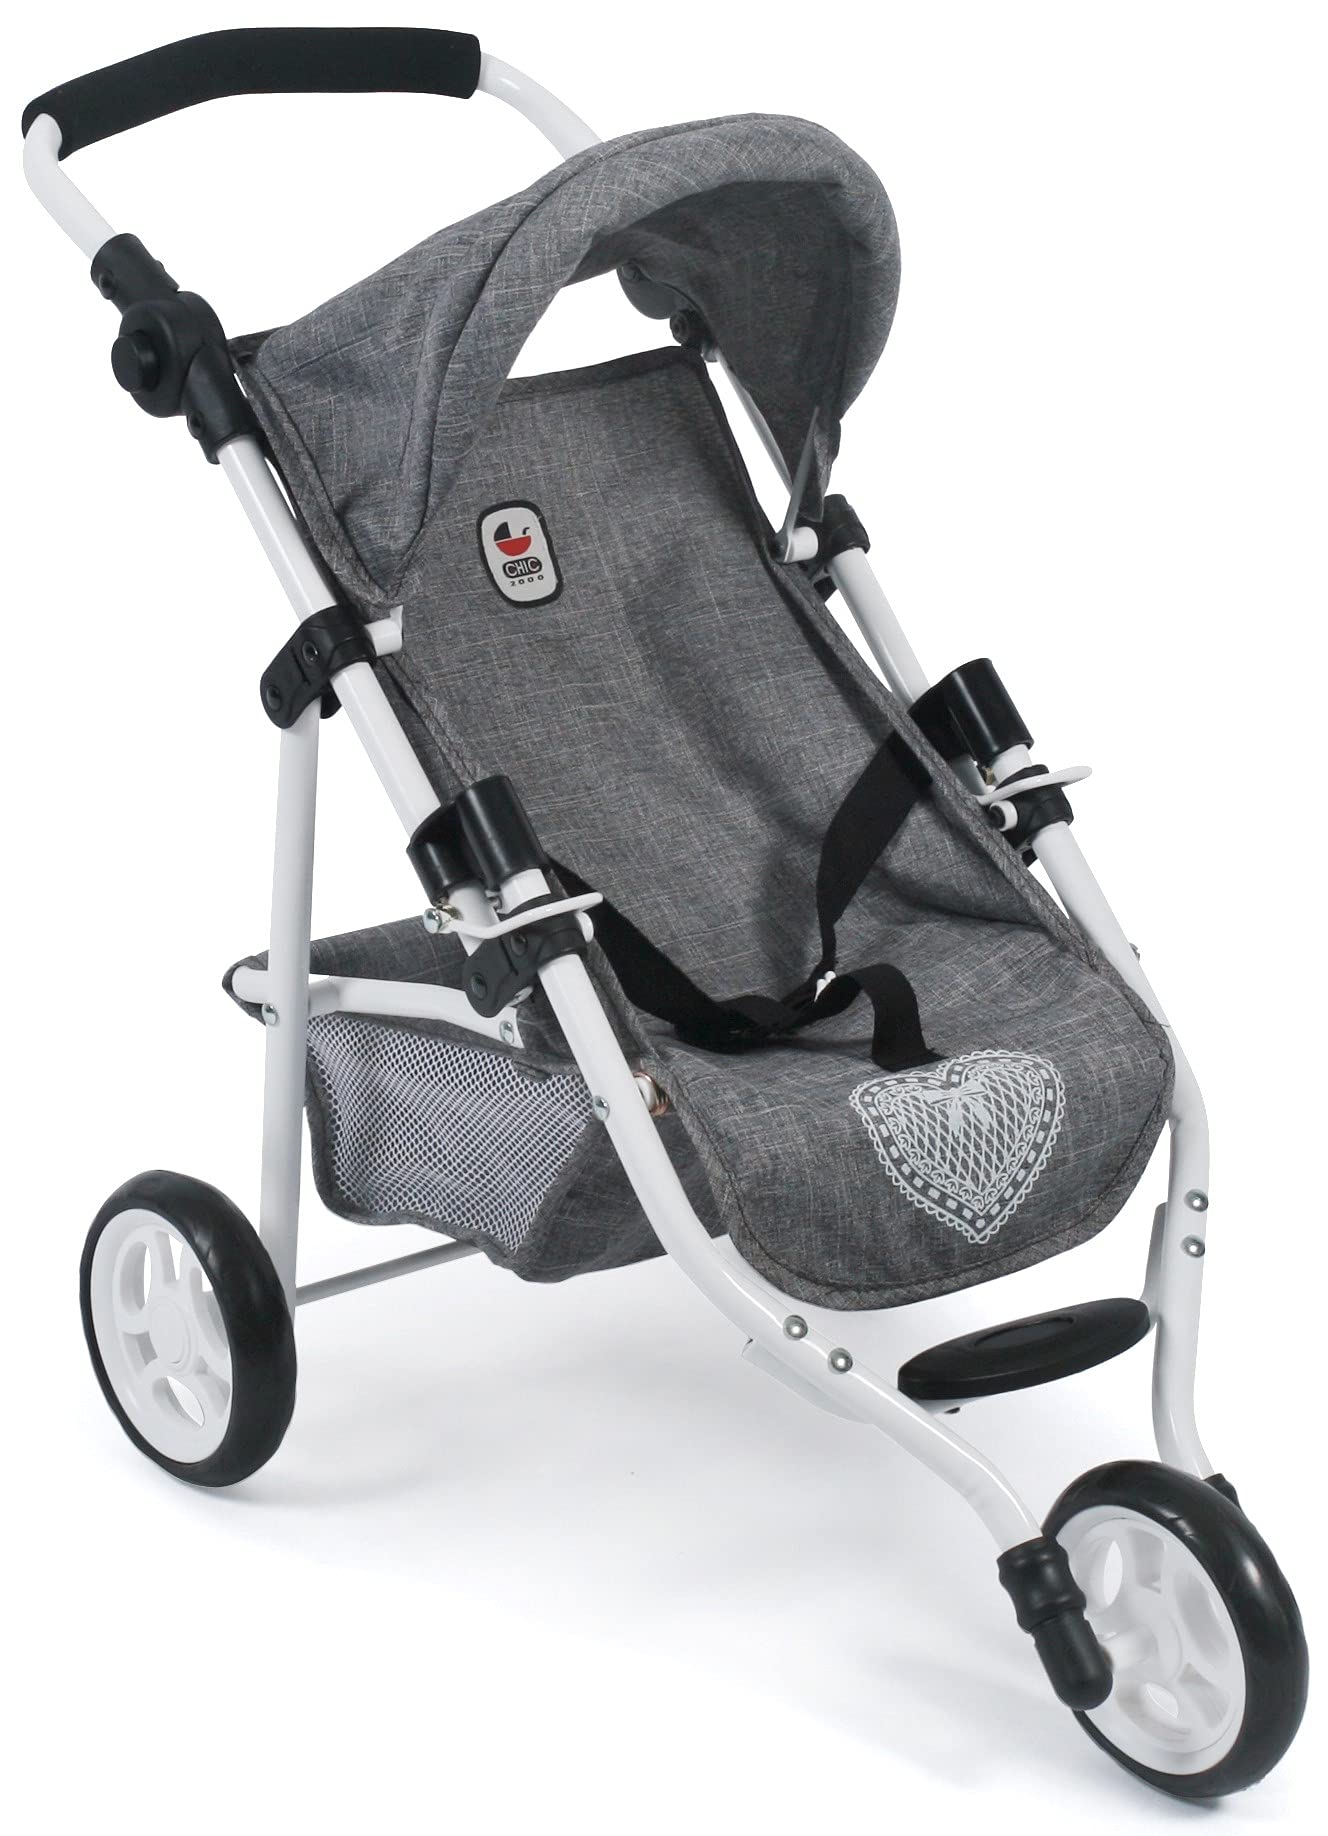 Bayer Chic 2000 - Puppenbuggy Lola, Jogging-Buggy, Puppenjogger, Puppenwagen, Jeans grau